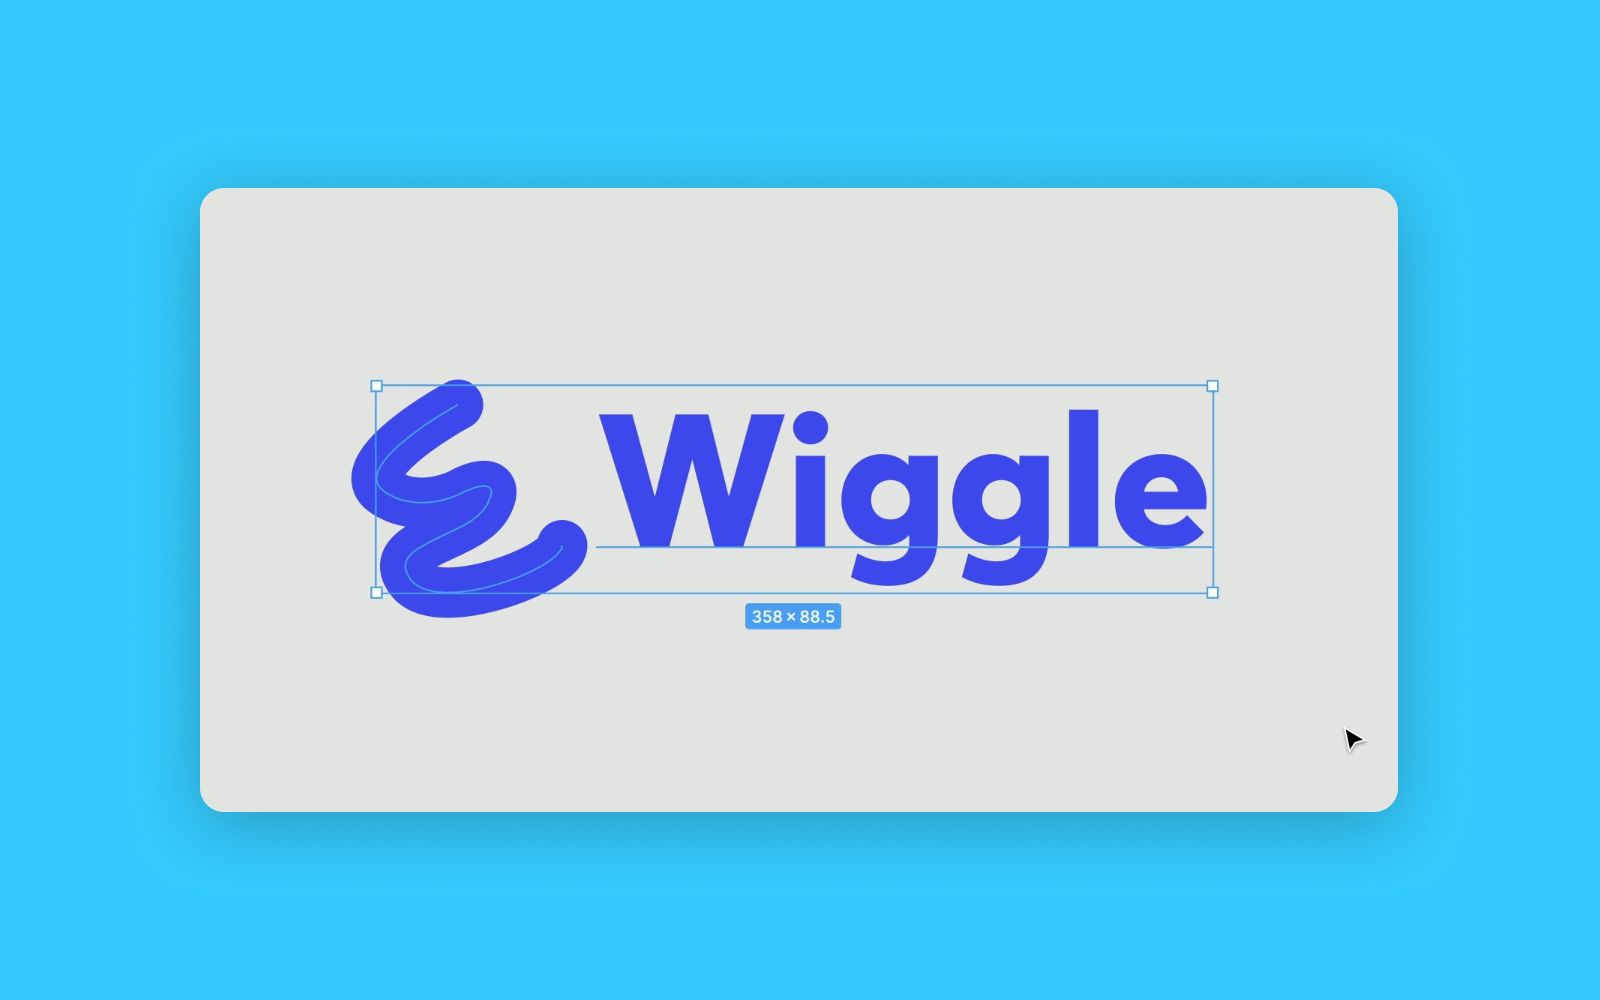 Example of a logo in Figma